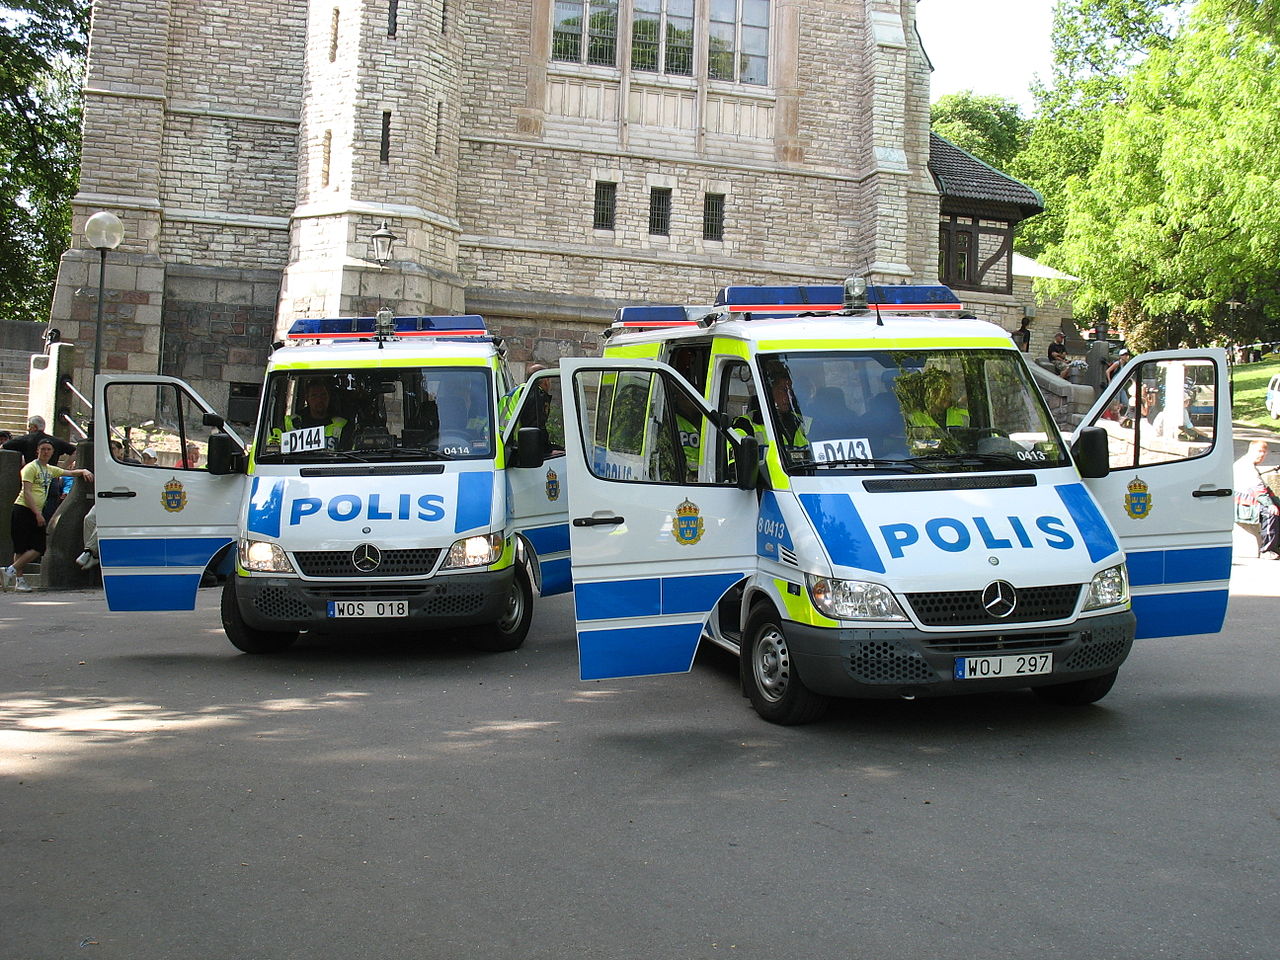 Two vans of the Swedish Police in Stockholm